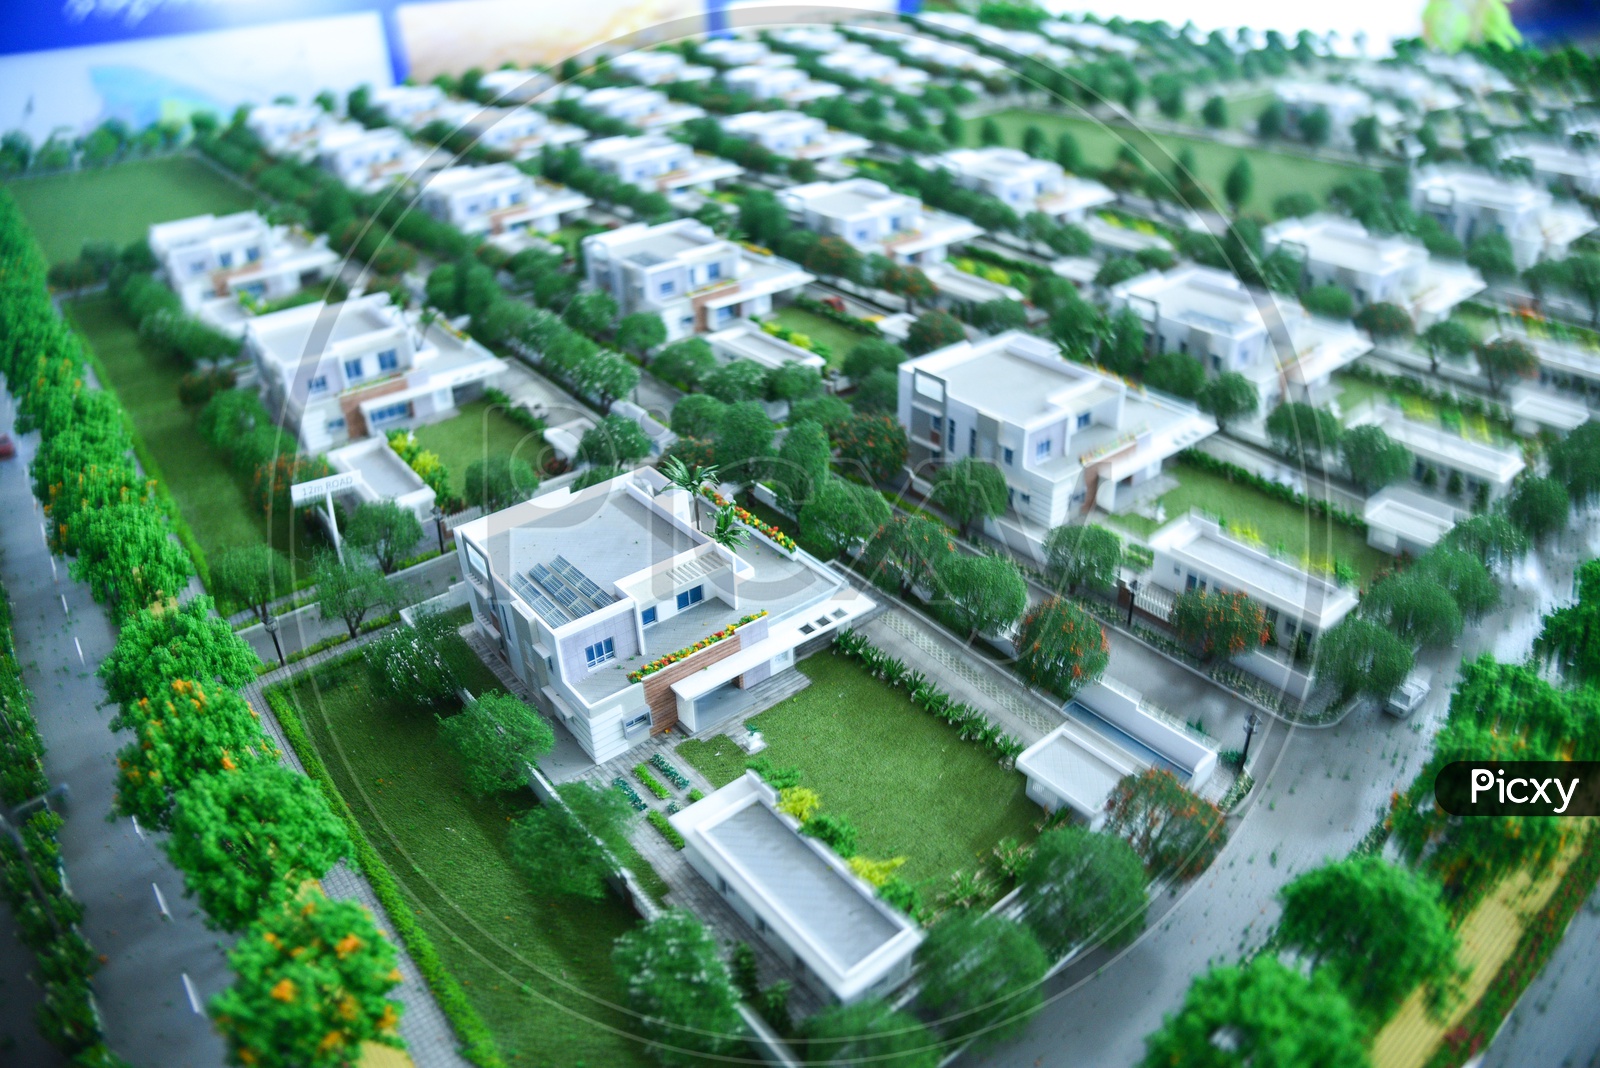 Residential Colony For  VIP  Model Scale  Miniature Presentation